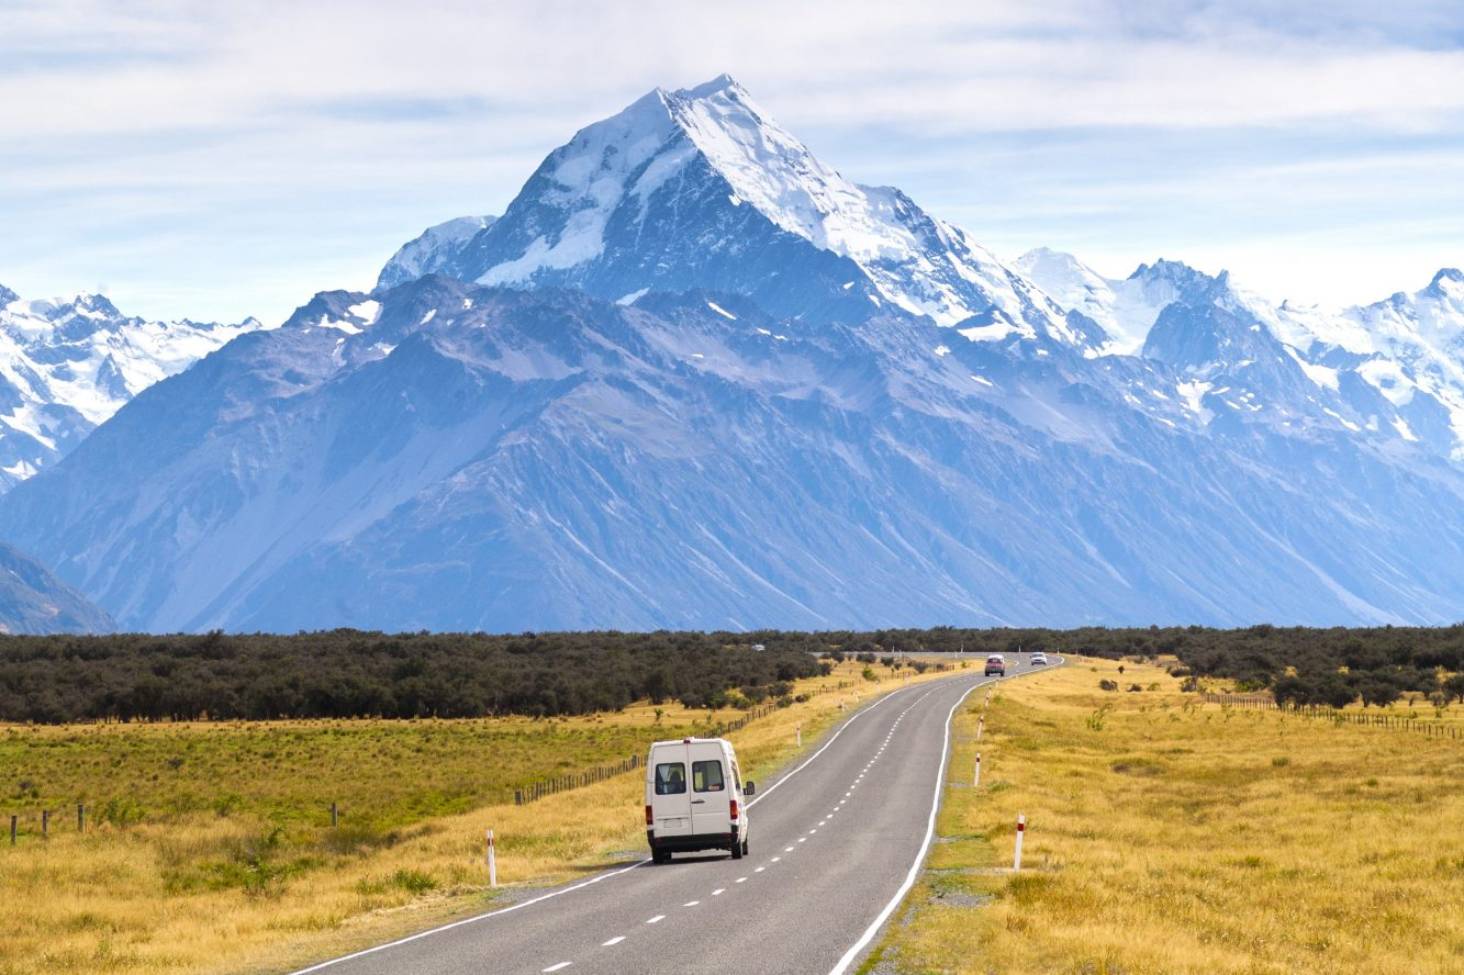 Hey, We Bet You Can’t Get Better Than 80% On This Random Knowledge Quiz Mount Cook, New Zealand